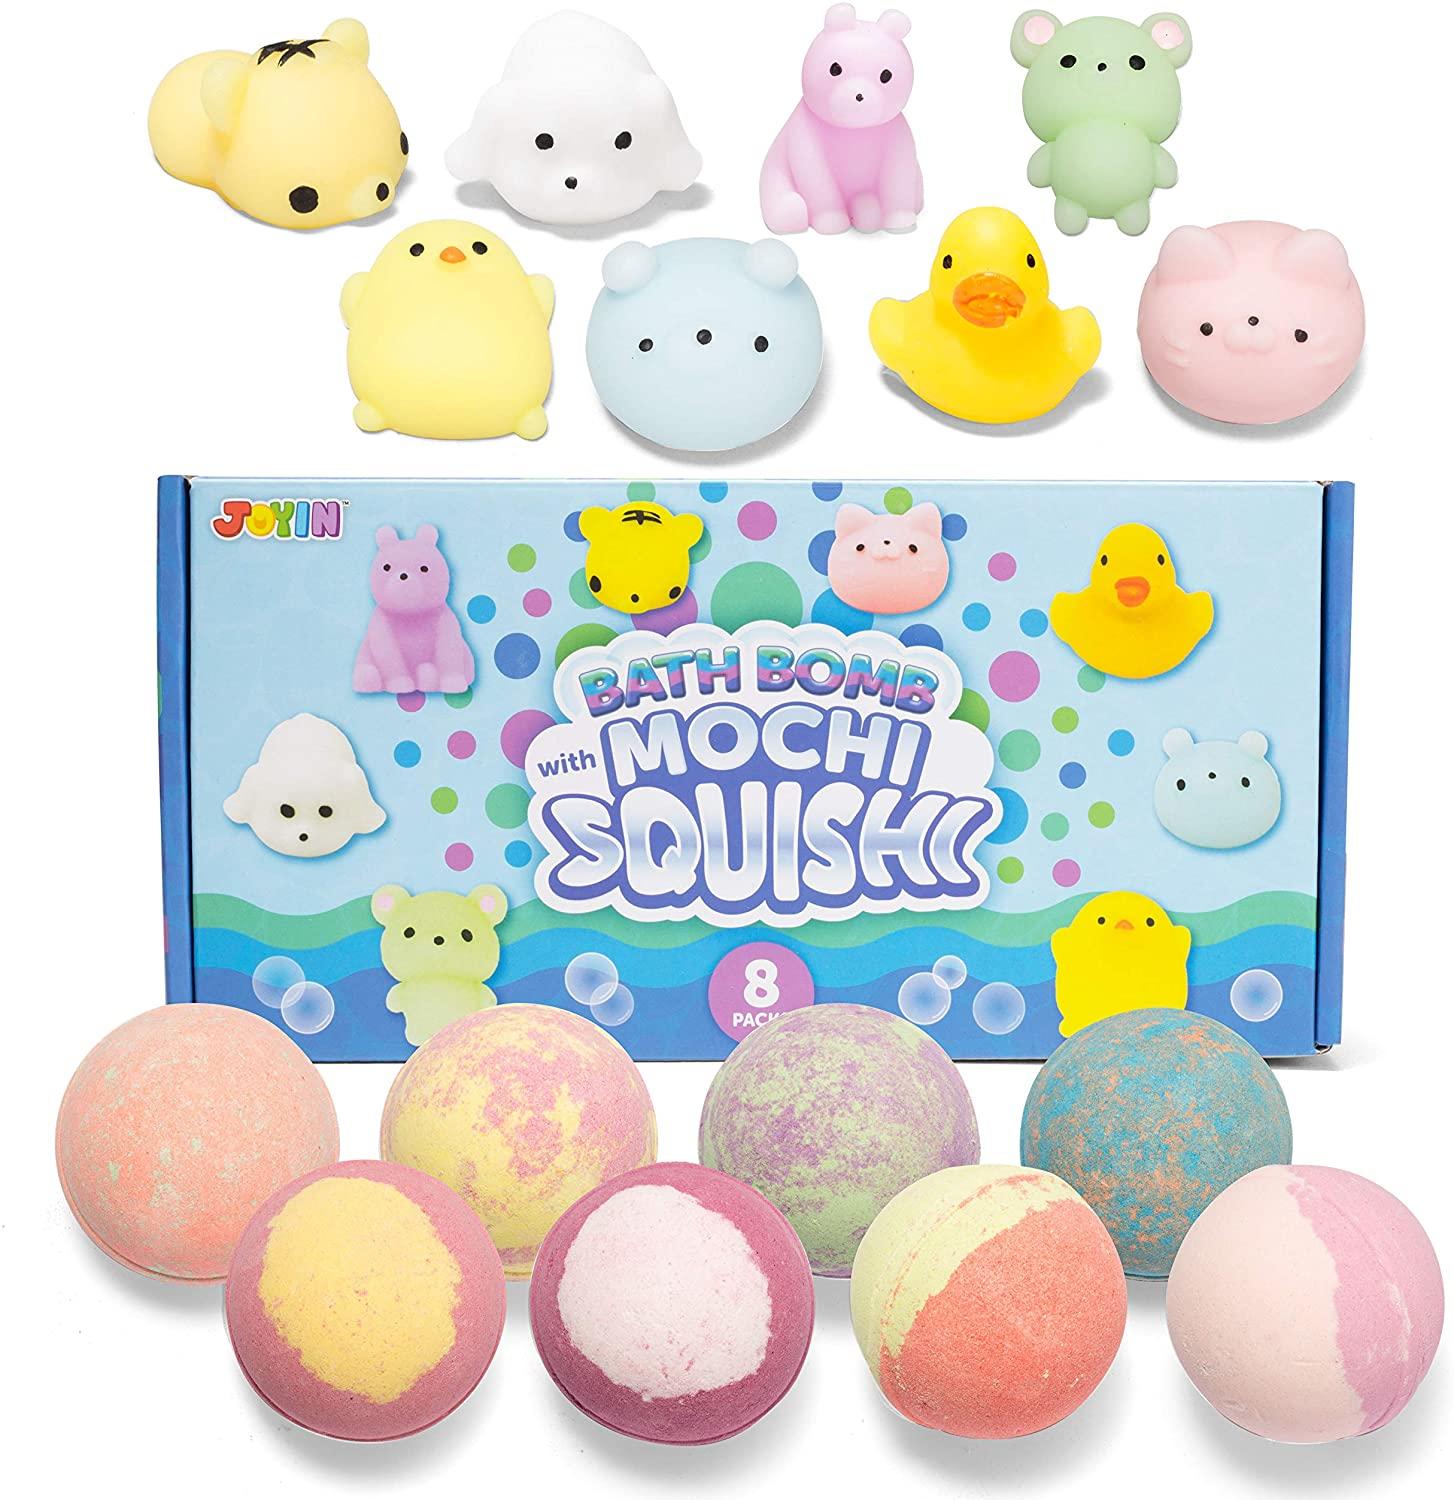 bath bomb pack with surprise toys inside 